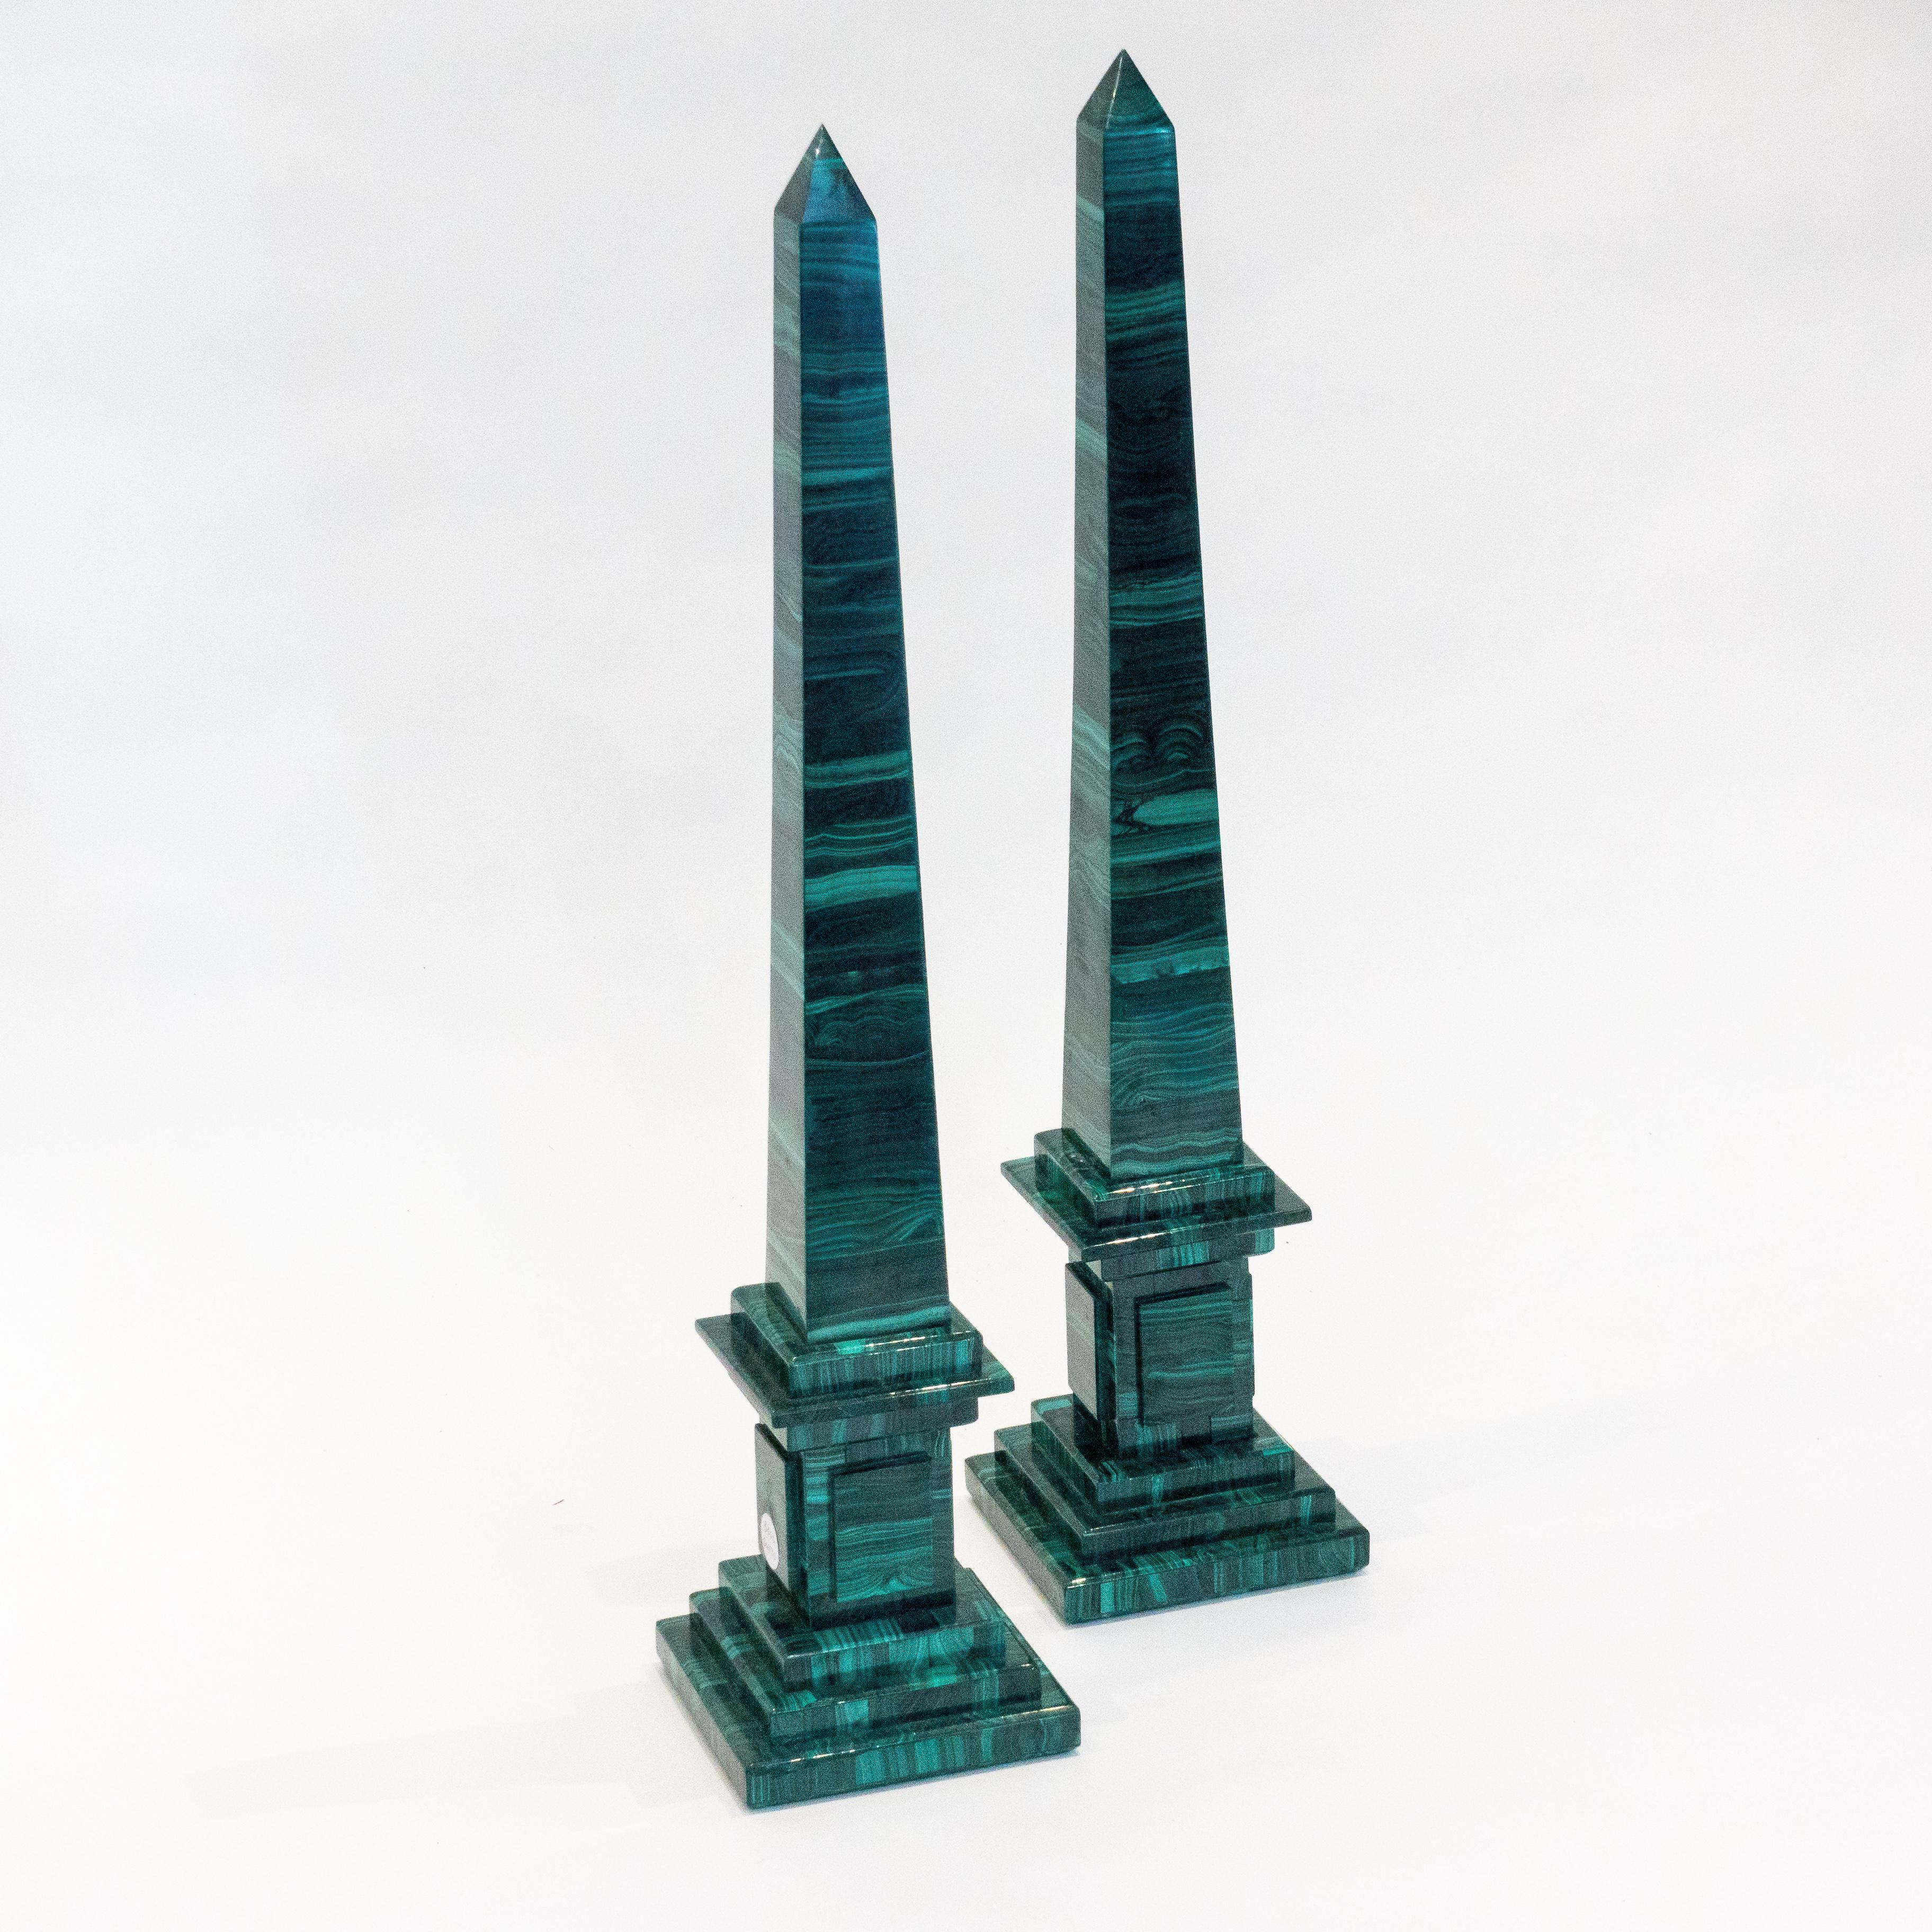 The malachite for this set of obelisks was sourced from the Congo, where the finest quality of this mineral is currently found. Malachite from the 18th and 19th century was also sourced from Russia. Obelisks were always an important object brought